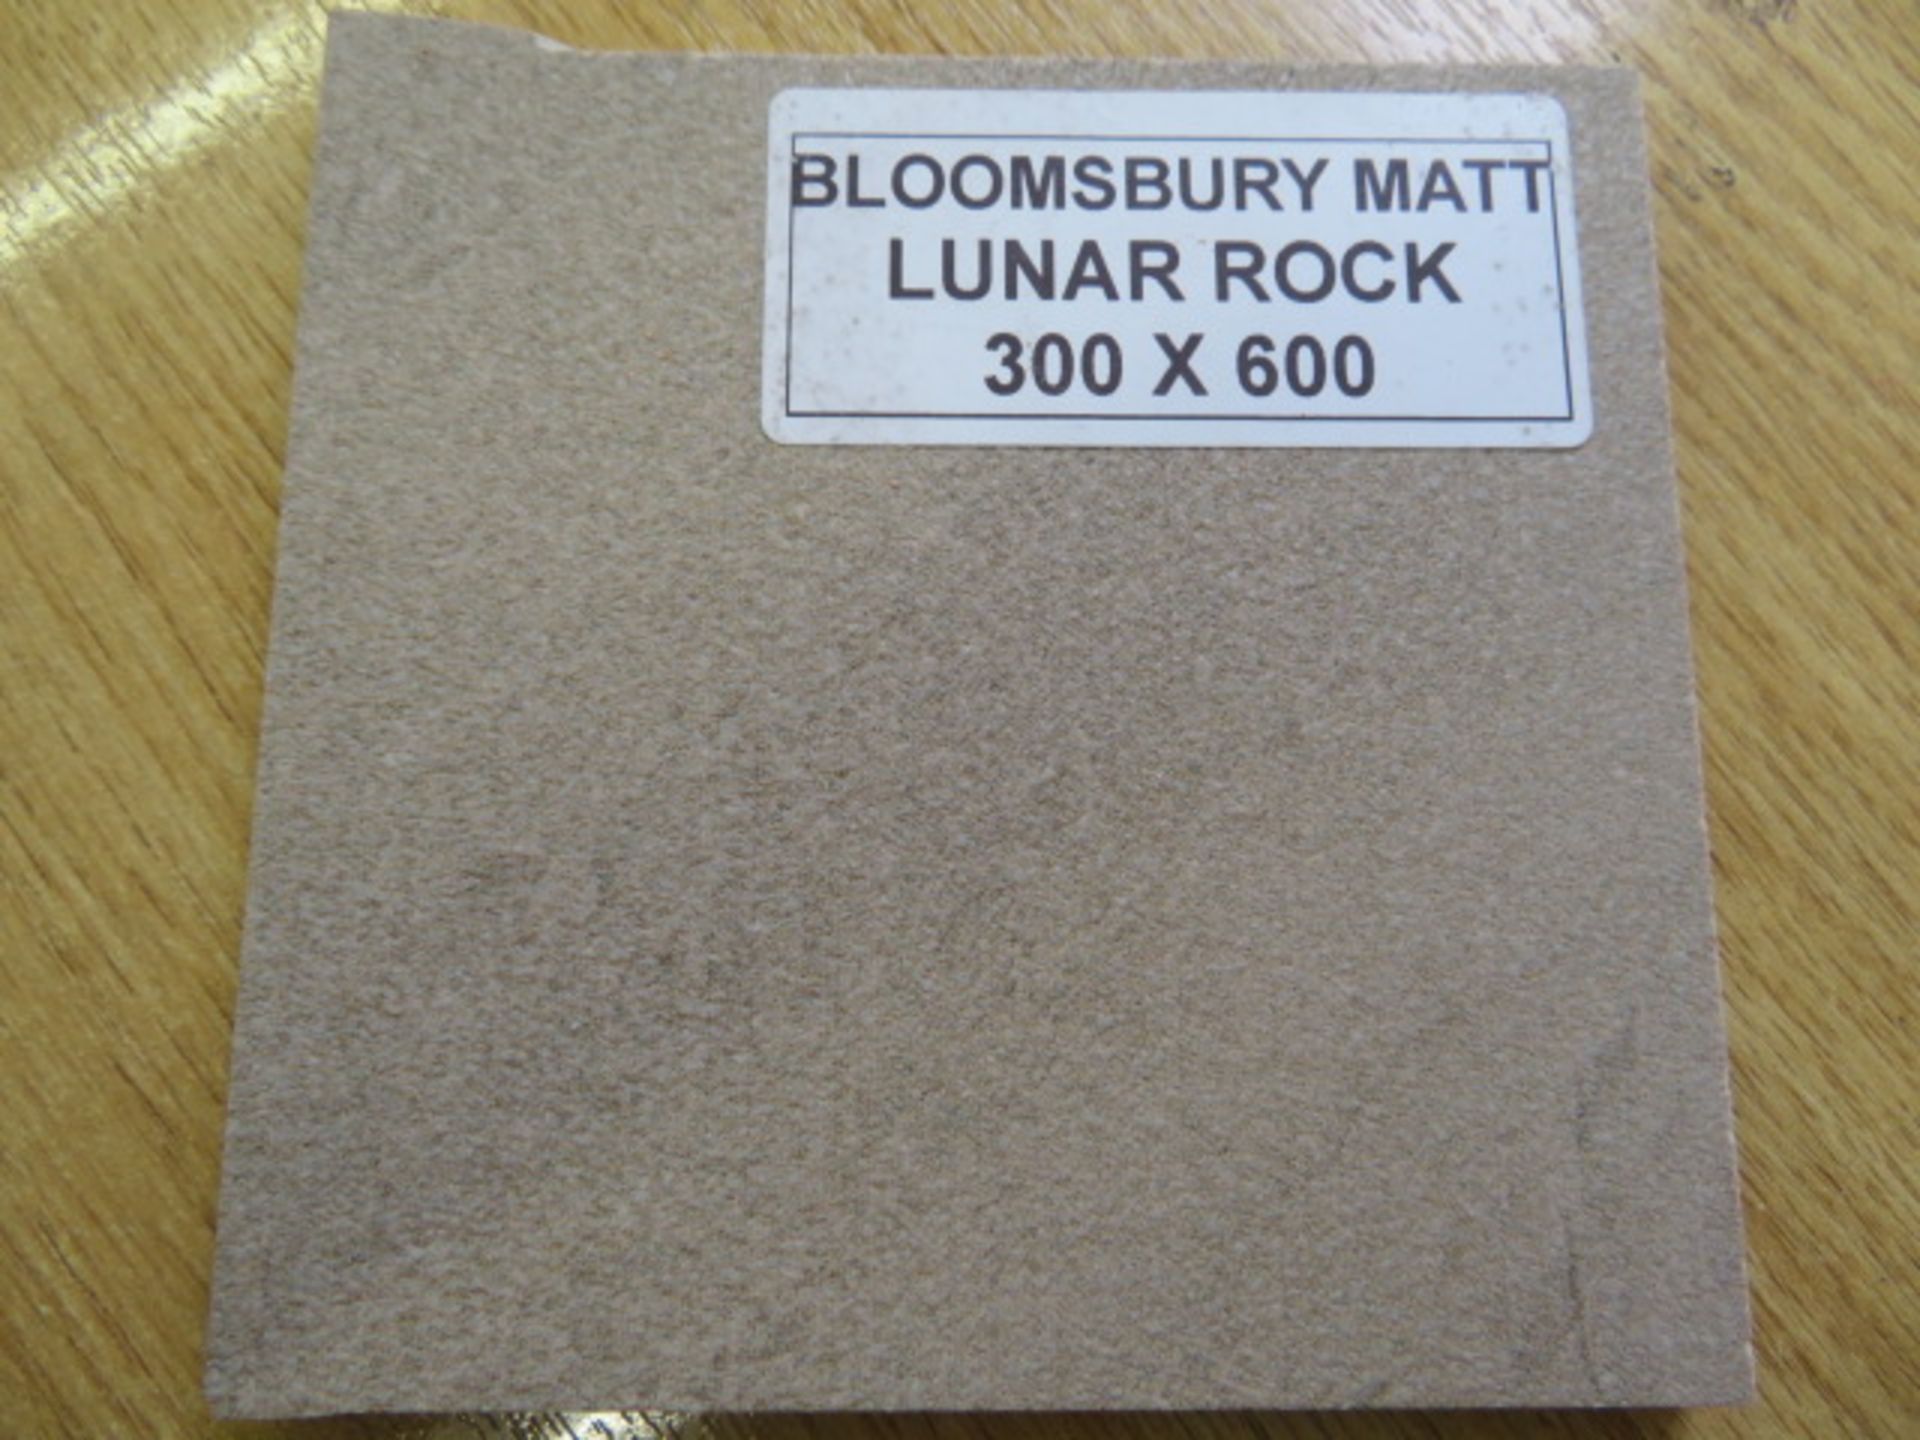 NEW 17.282 Bloomsbury Matte Lunar Rock Wall and Floor Tiles. 300x600mm per tile, 8.3mm thick The - Image 2 of 2